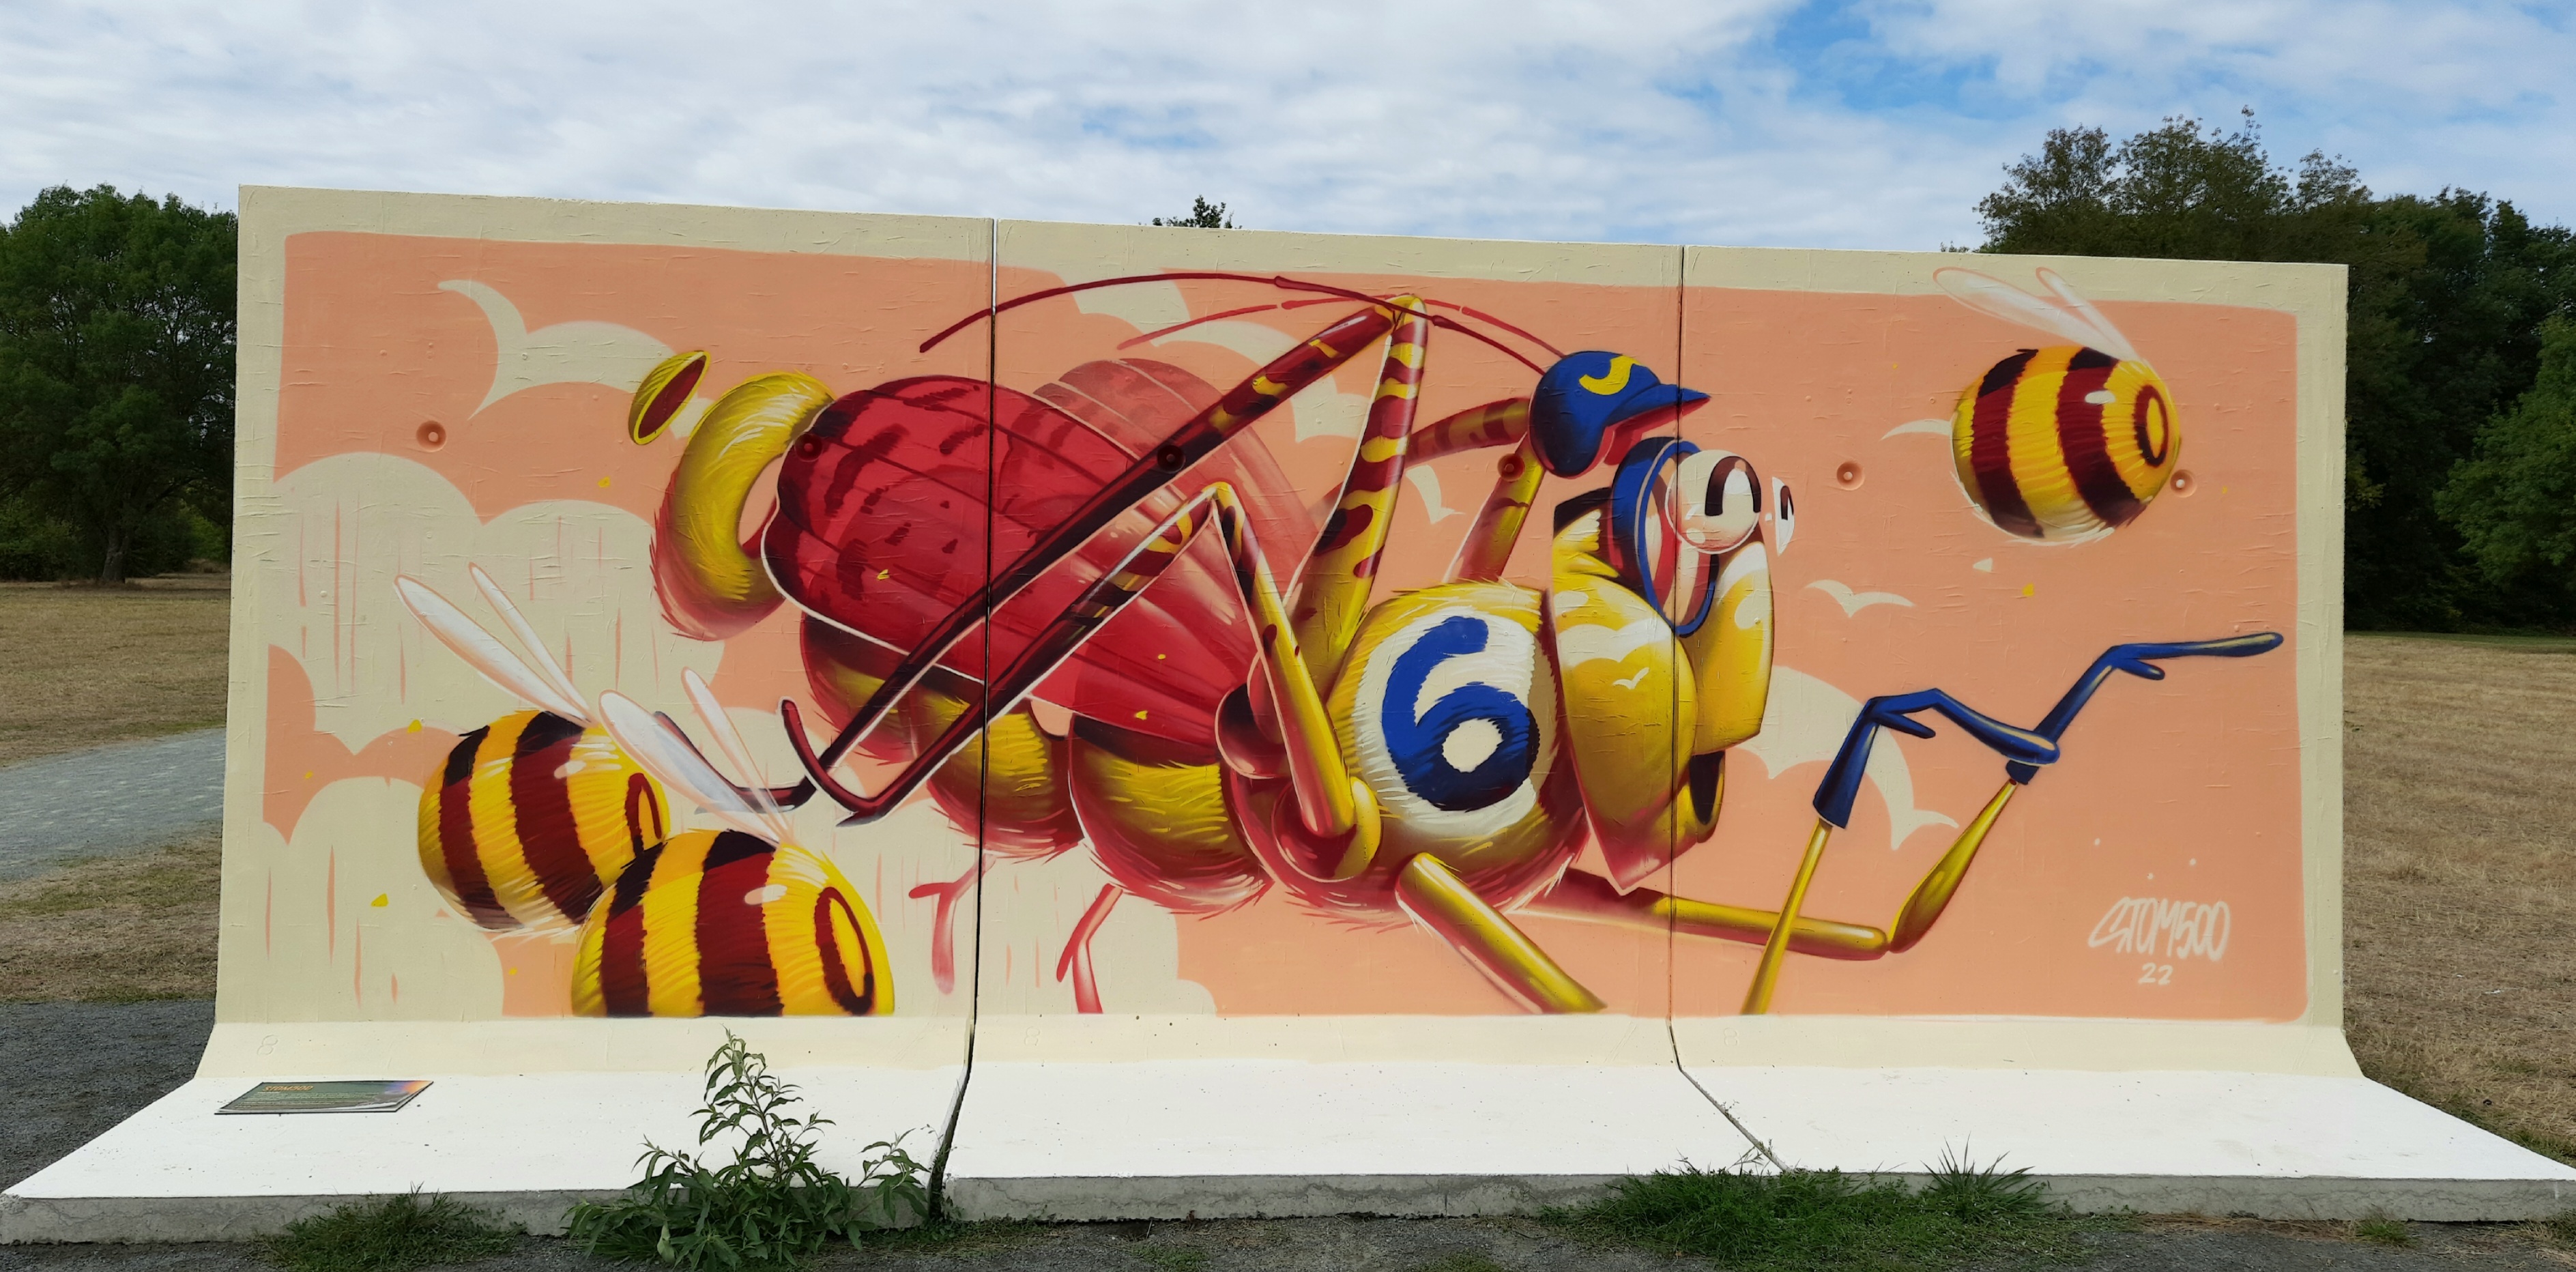 Graffiti 6946  by the artist Stom500 captured by Mephisroth in Le Mans France